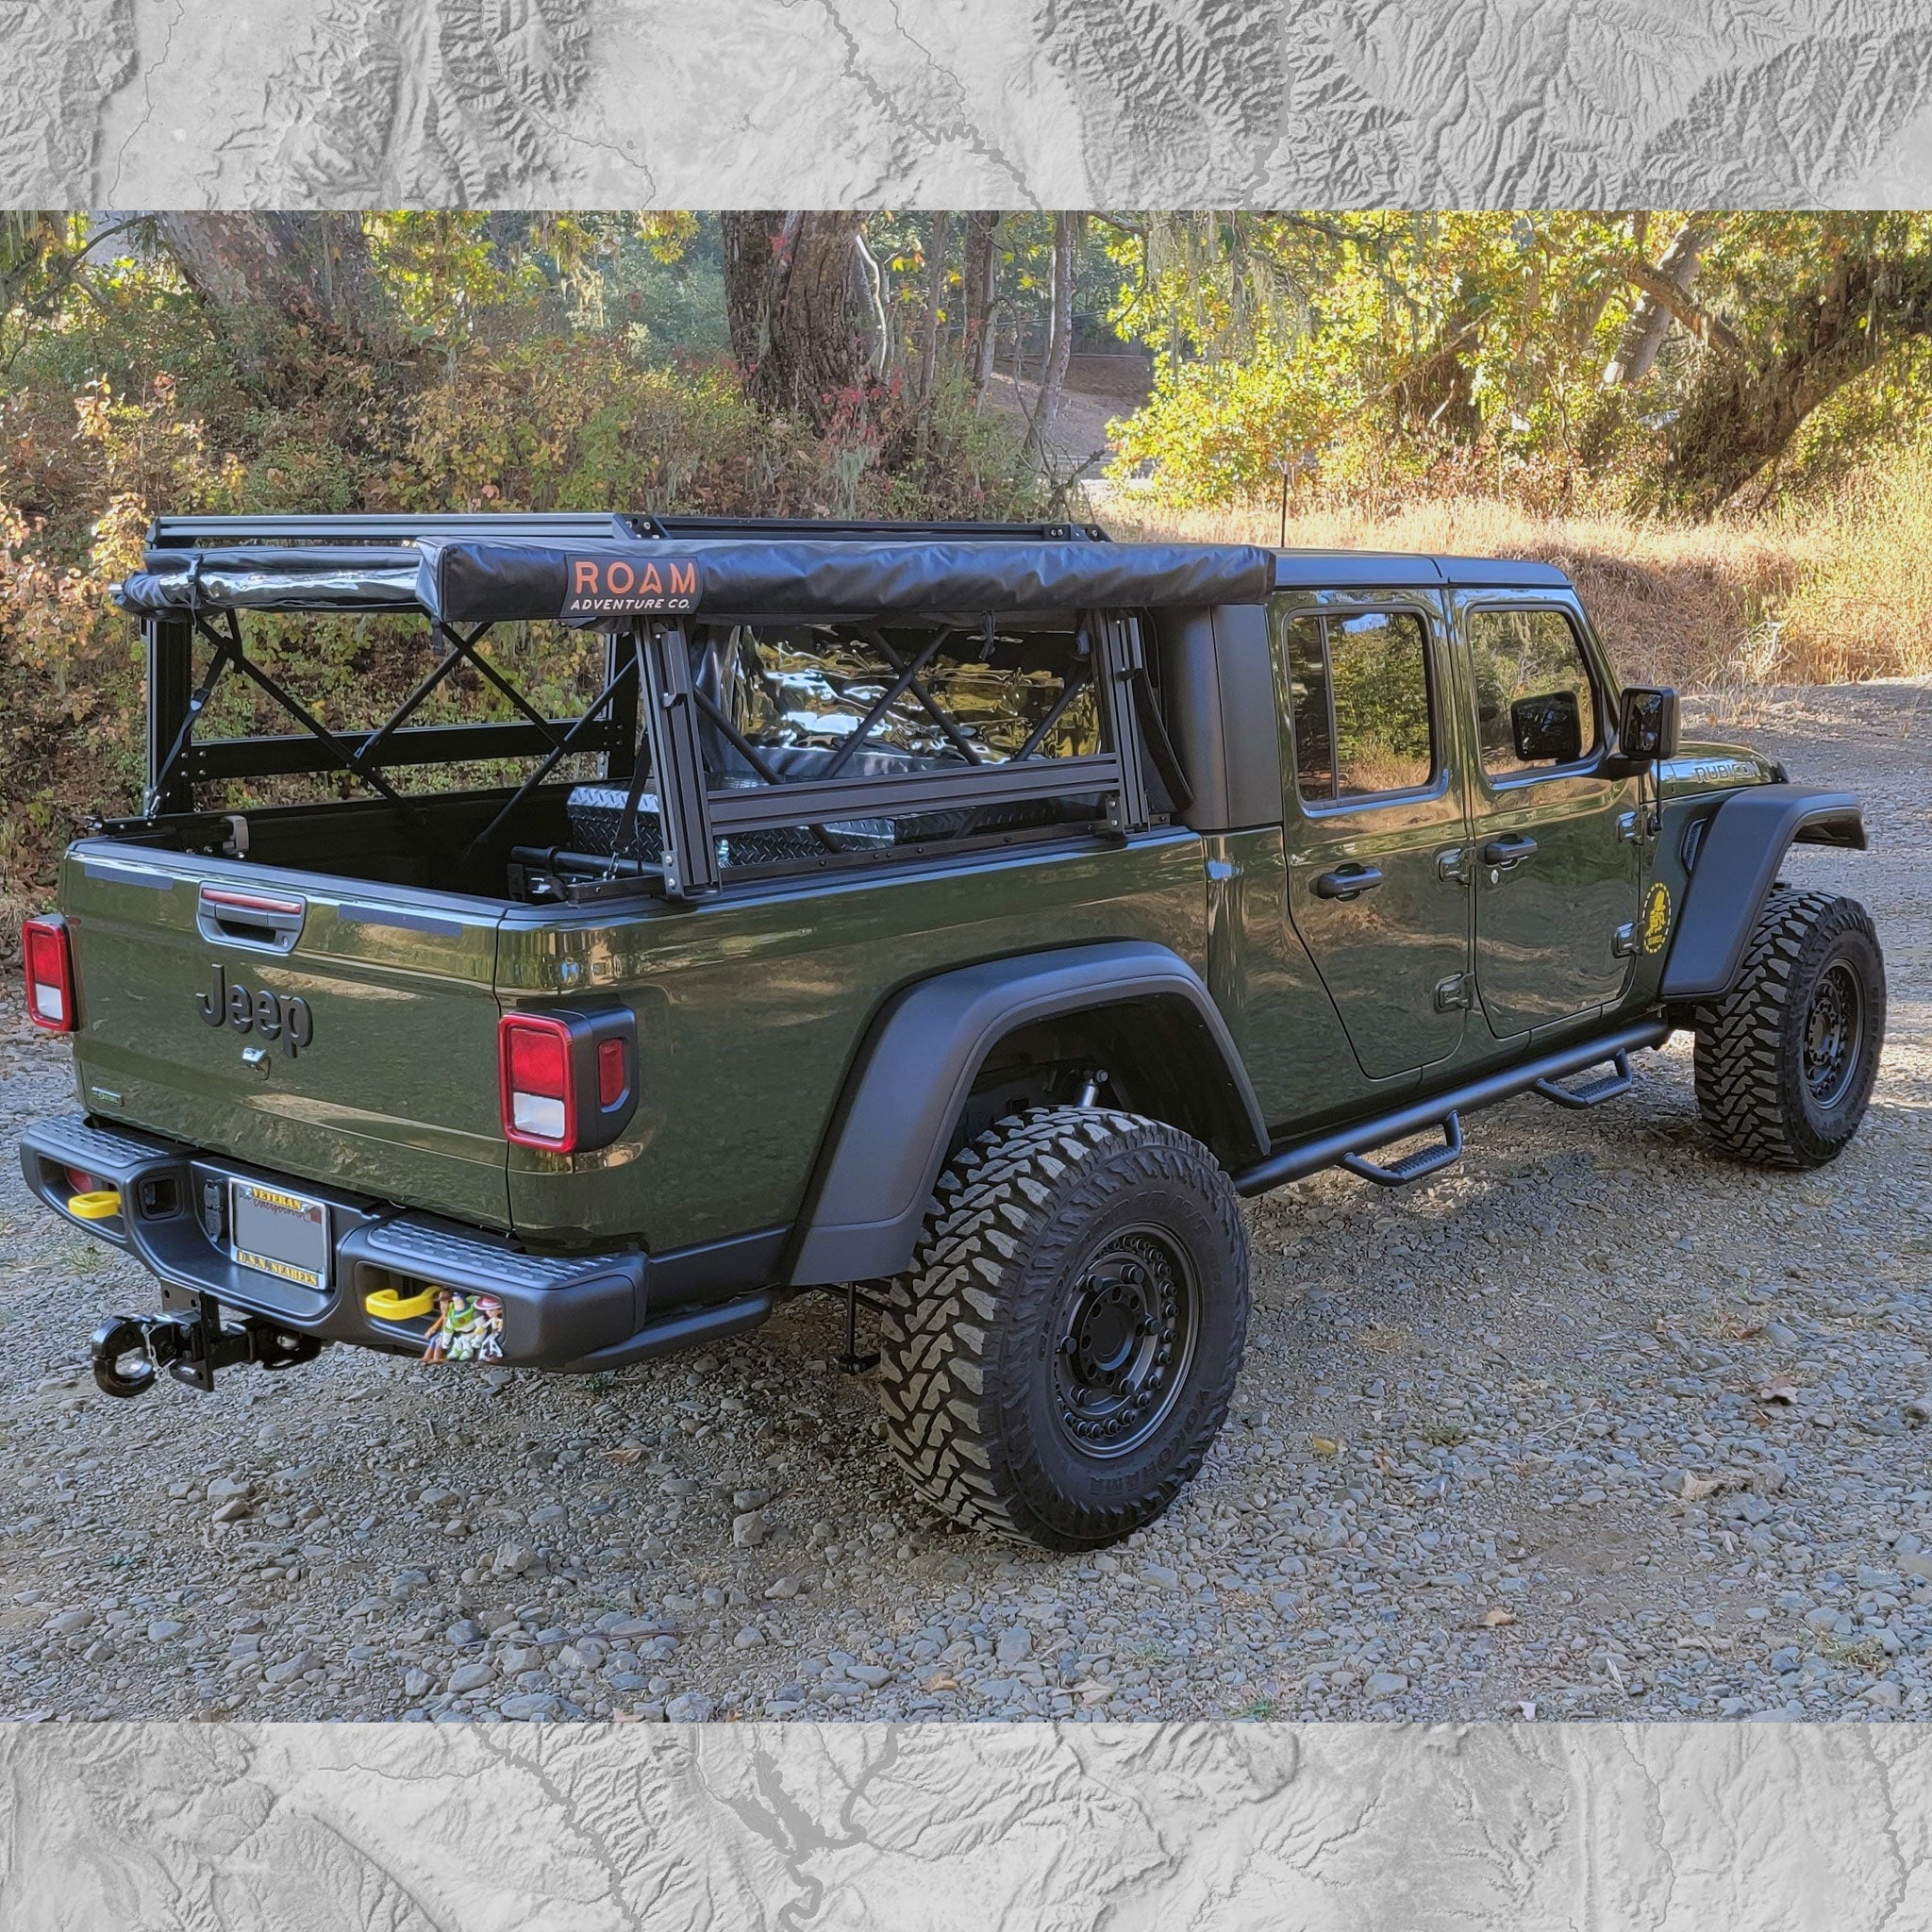 Jeep Gladiator Rubicon with XTR1 Bed Rack, Awning, and open Soft Topper.  